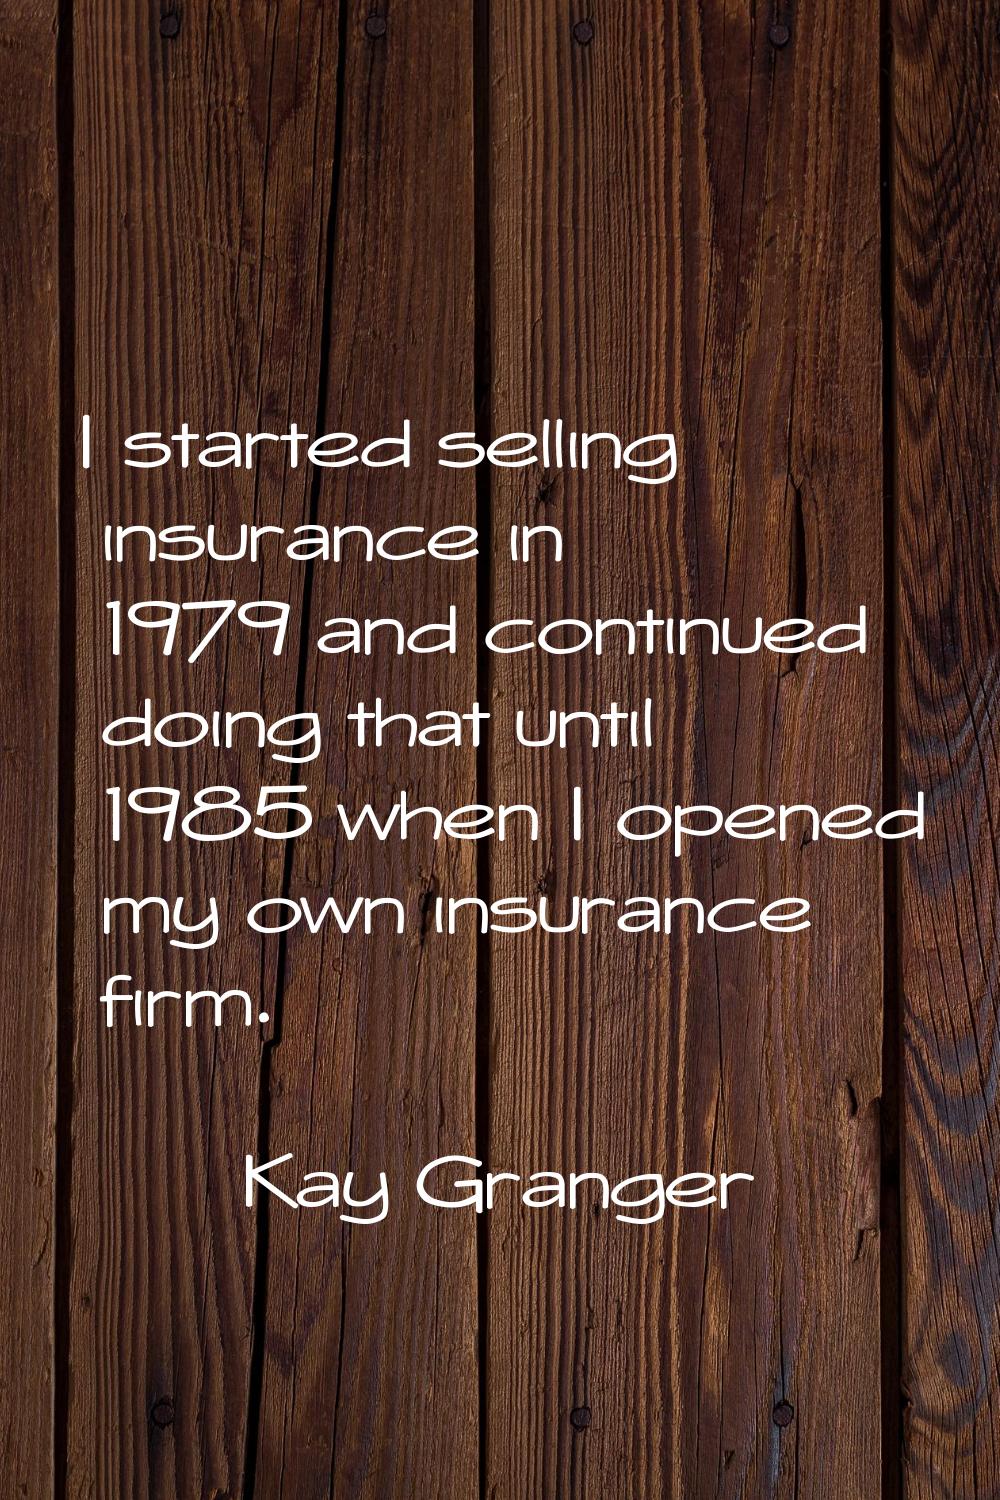 I started selling insurance in 1979 and continued doing that until 1985 when I opened my own insura